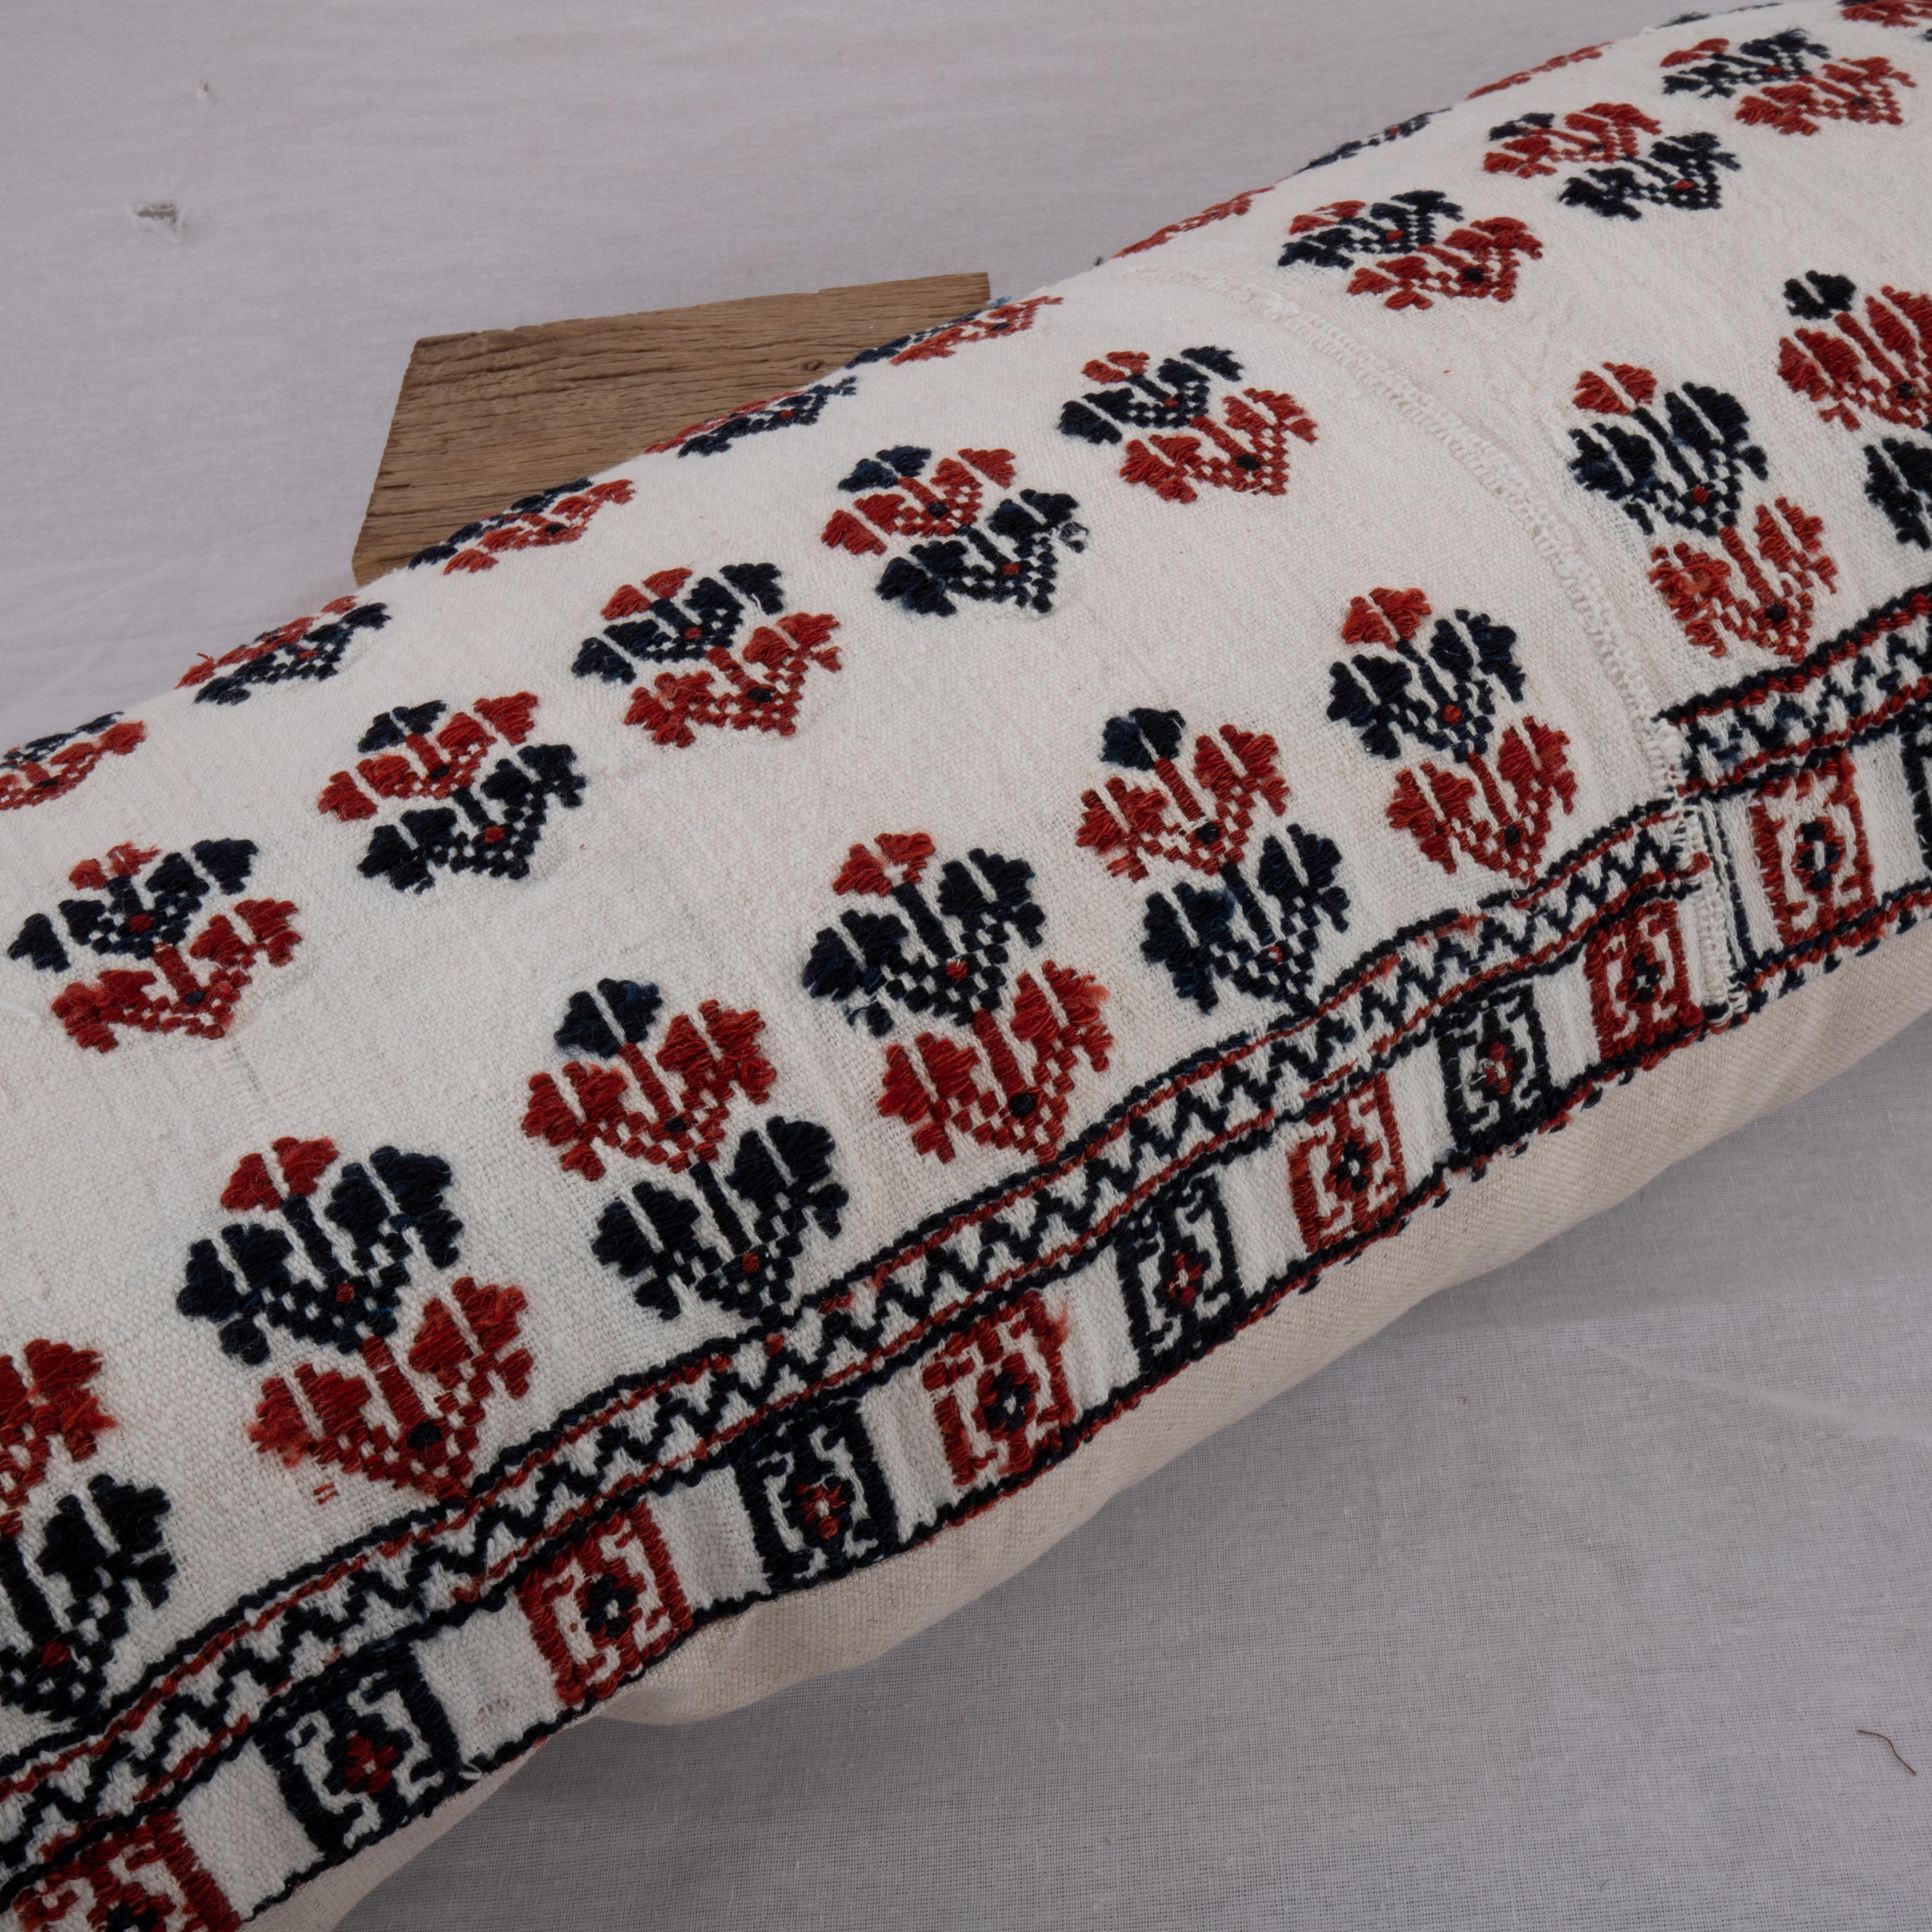 20th Century Pillow Cover Made from an Anatolian Embroidered Skirt, 2nd Quarter 20th C. For Sale